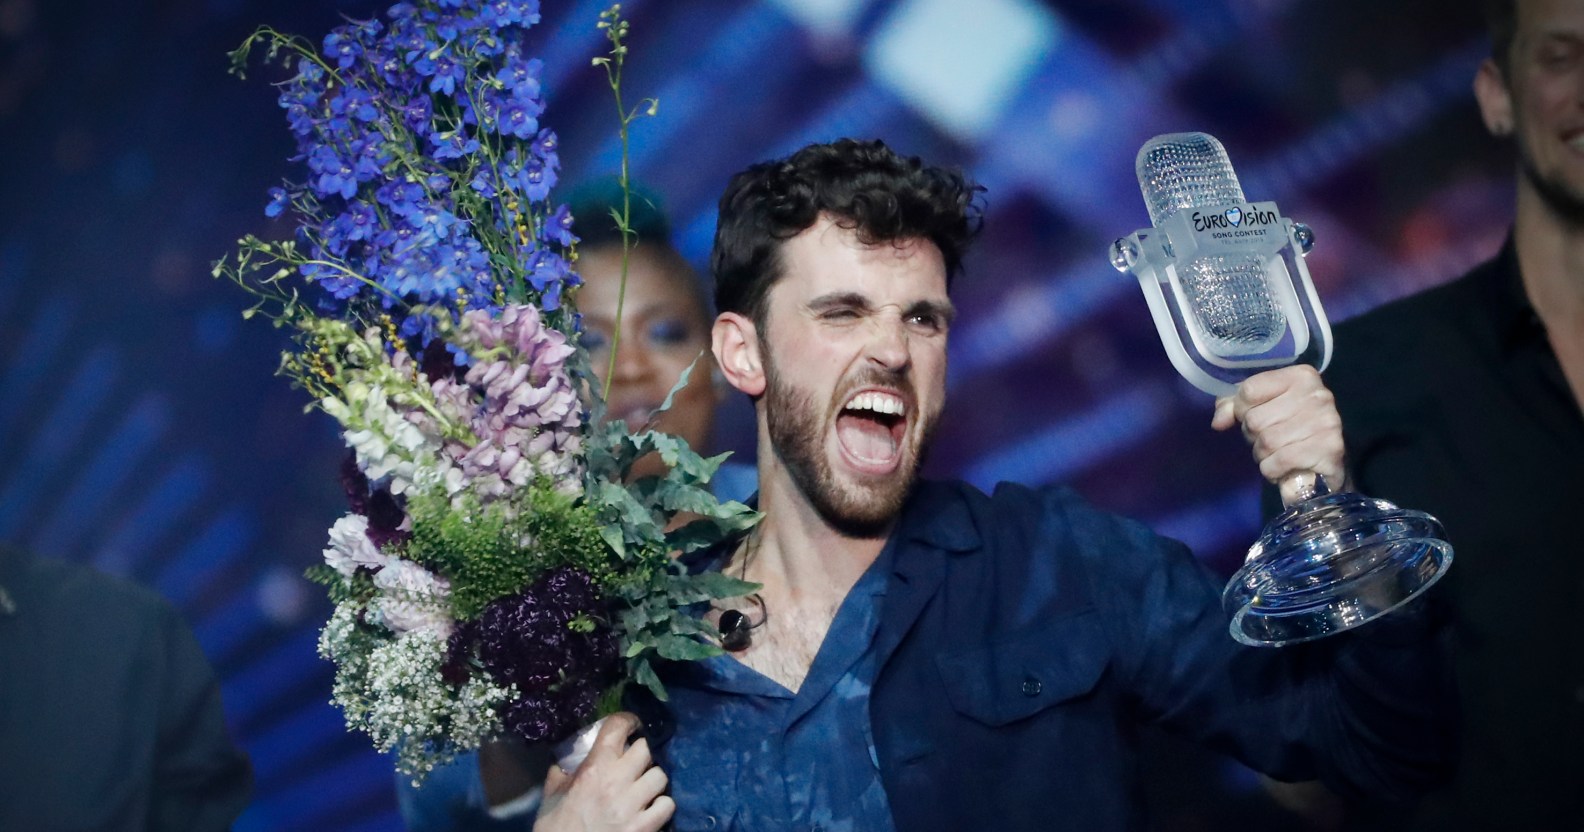 Duncan Laurence, representing The Netherlands, wins the Grand Final of the 64th annual Eurovision Song Contest. (Michael Campanella/Getty Images)